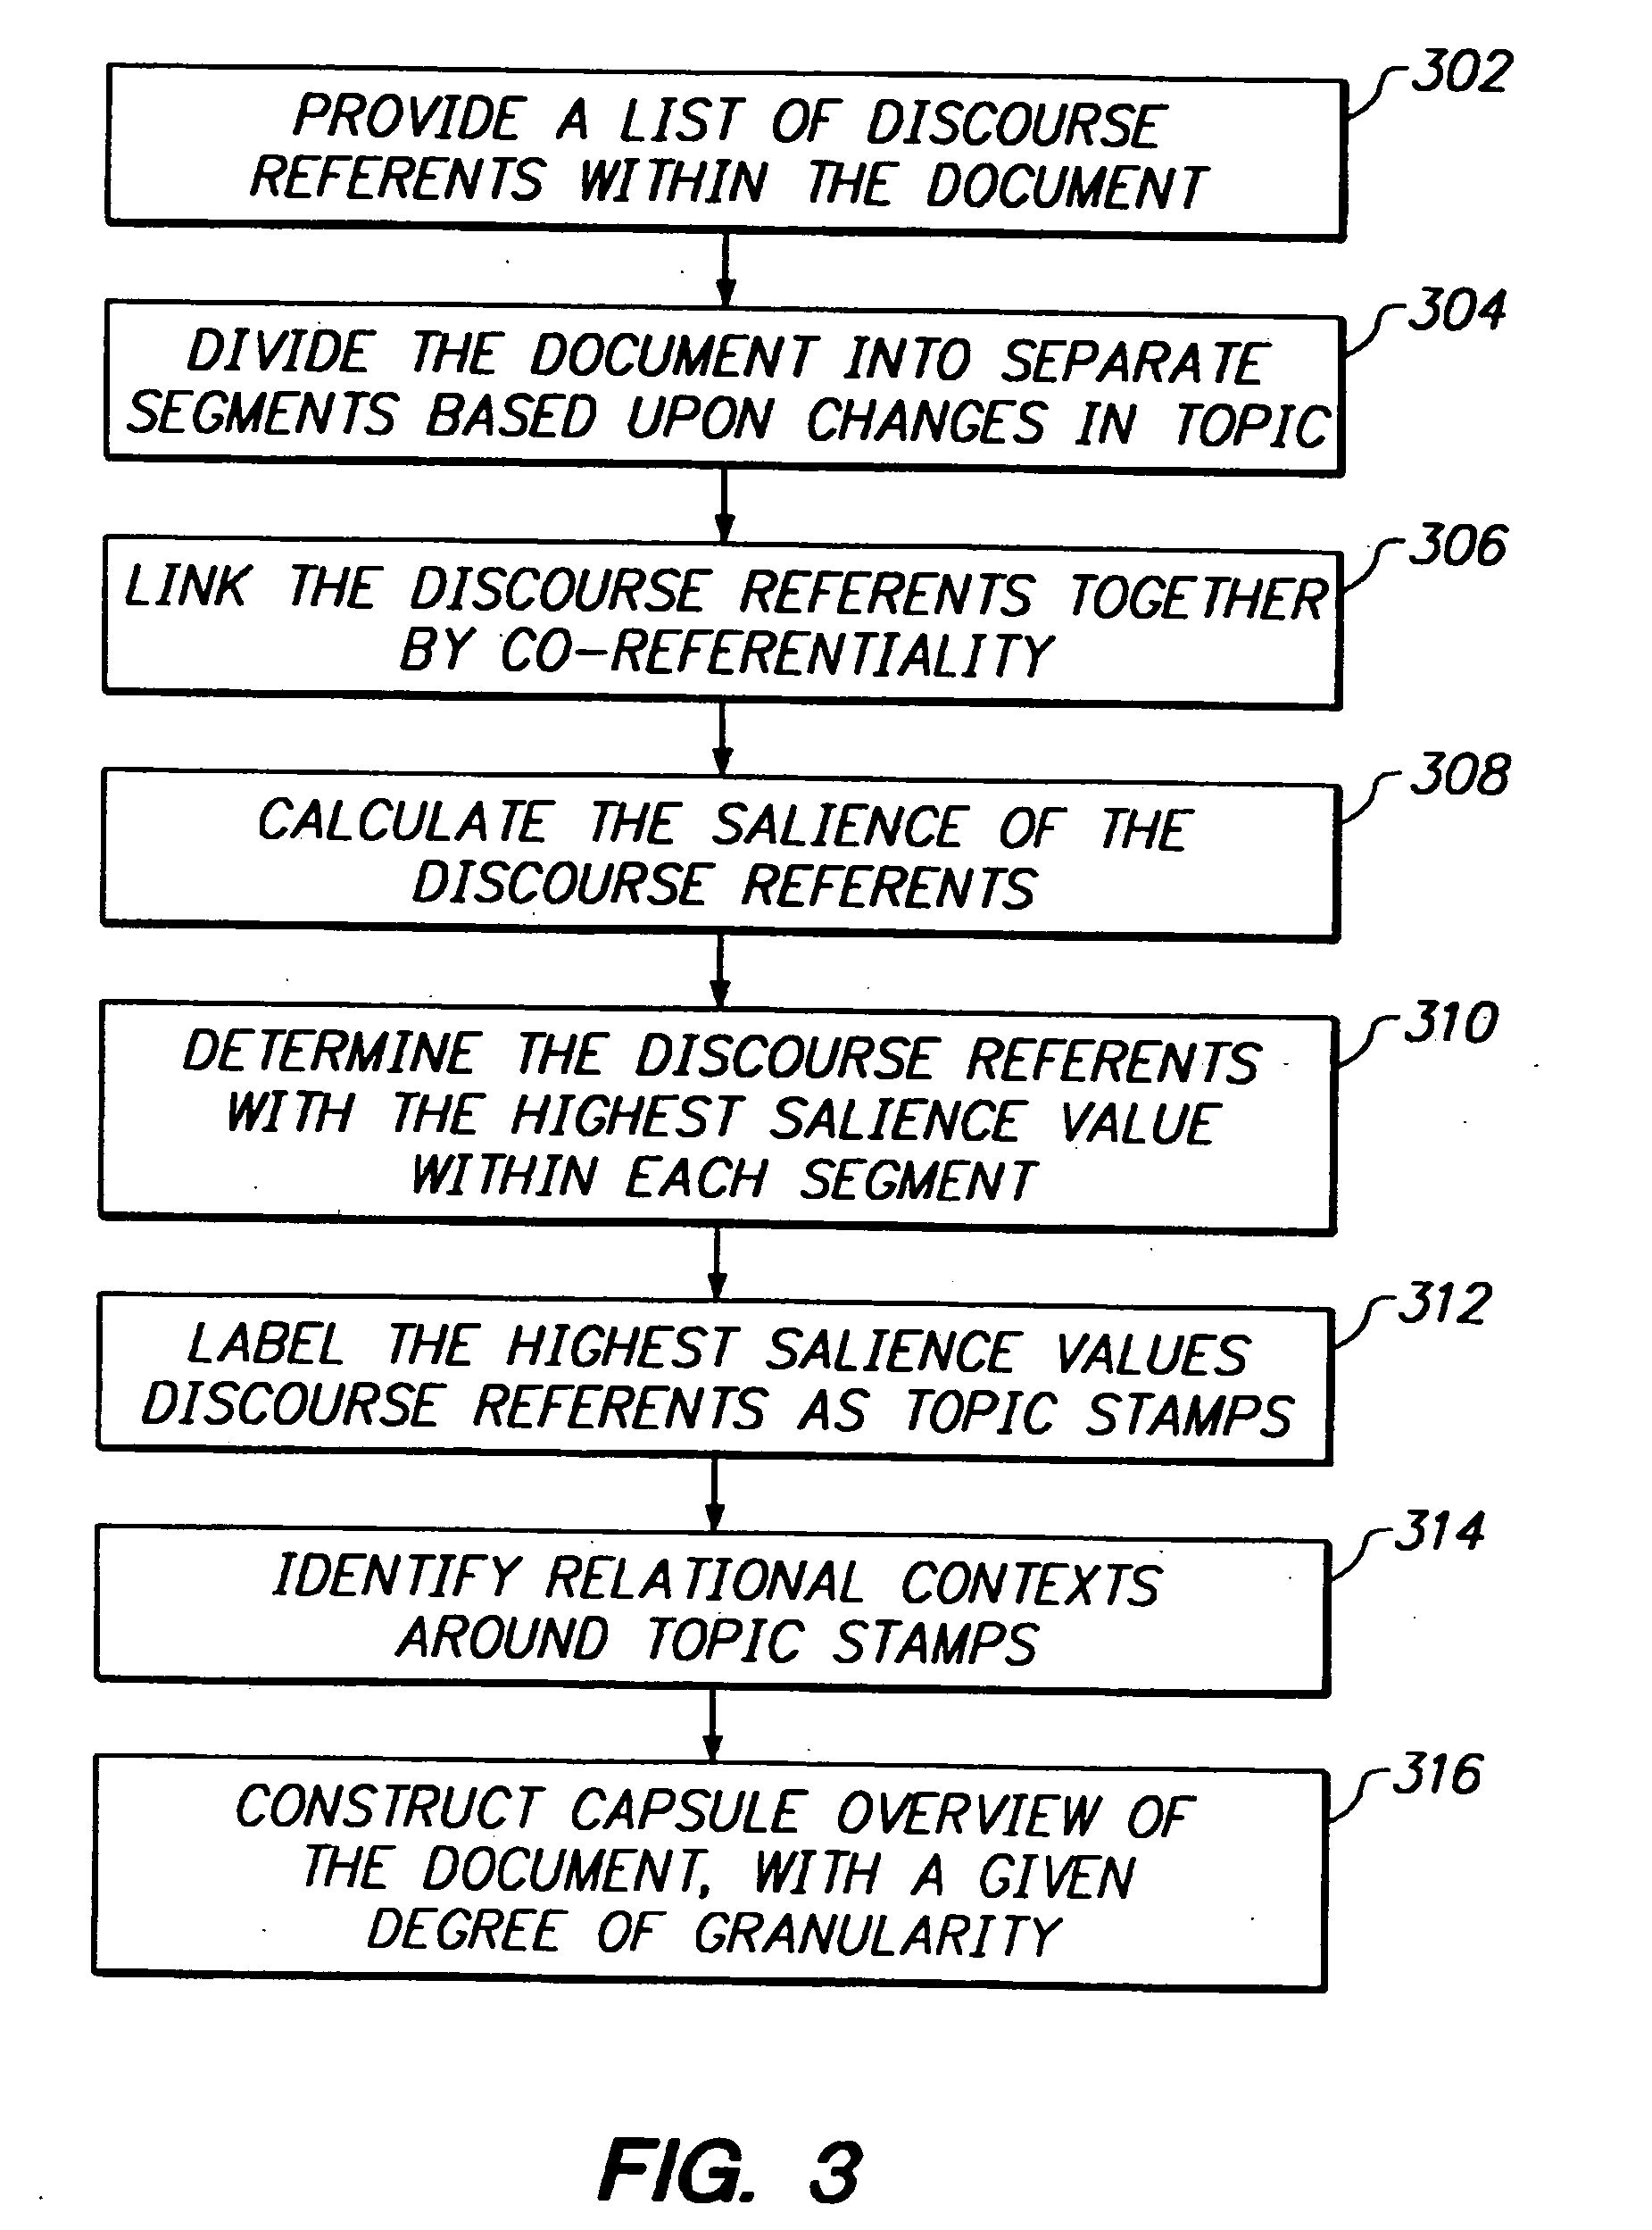 System and method for the dynamic presentation of the contents of a plurality of documents for rapid skimming